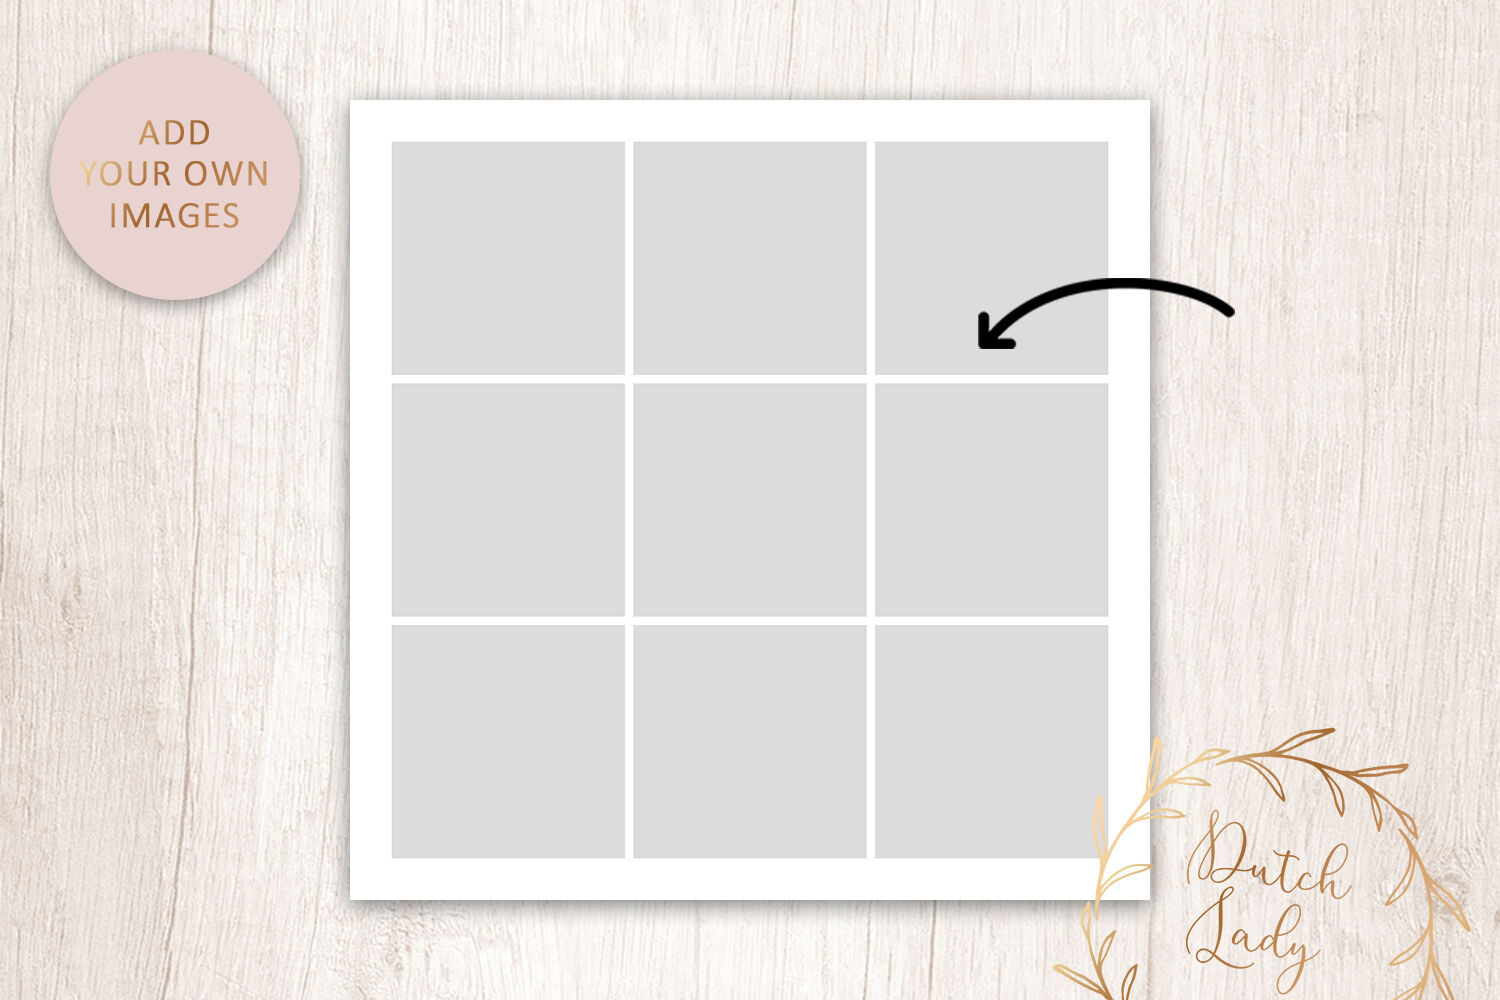 PSD Photo Collage Template 10 By The Dutch Lady Designs TheHungryJPEG